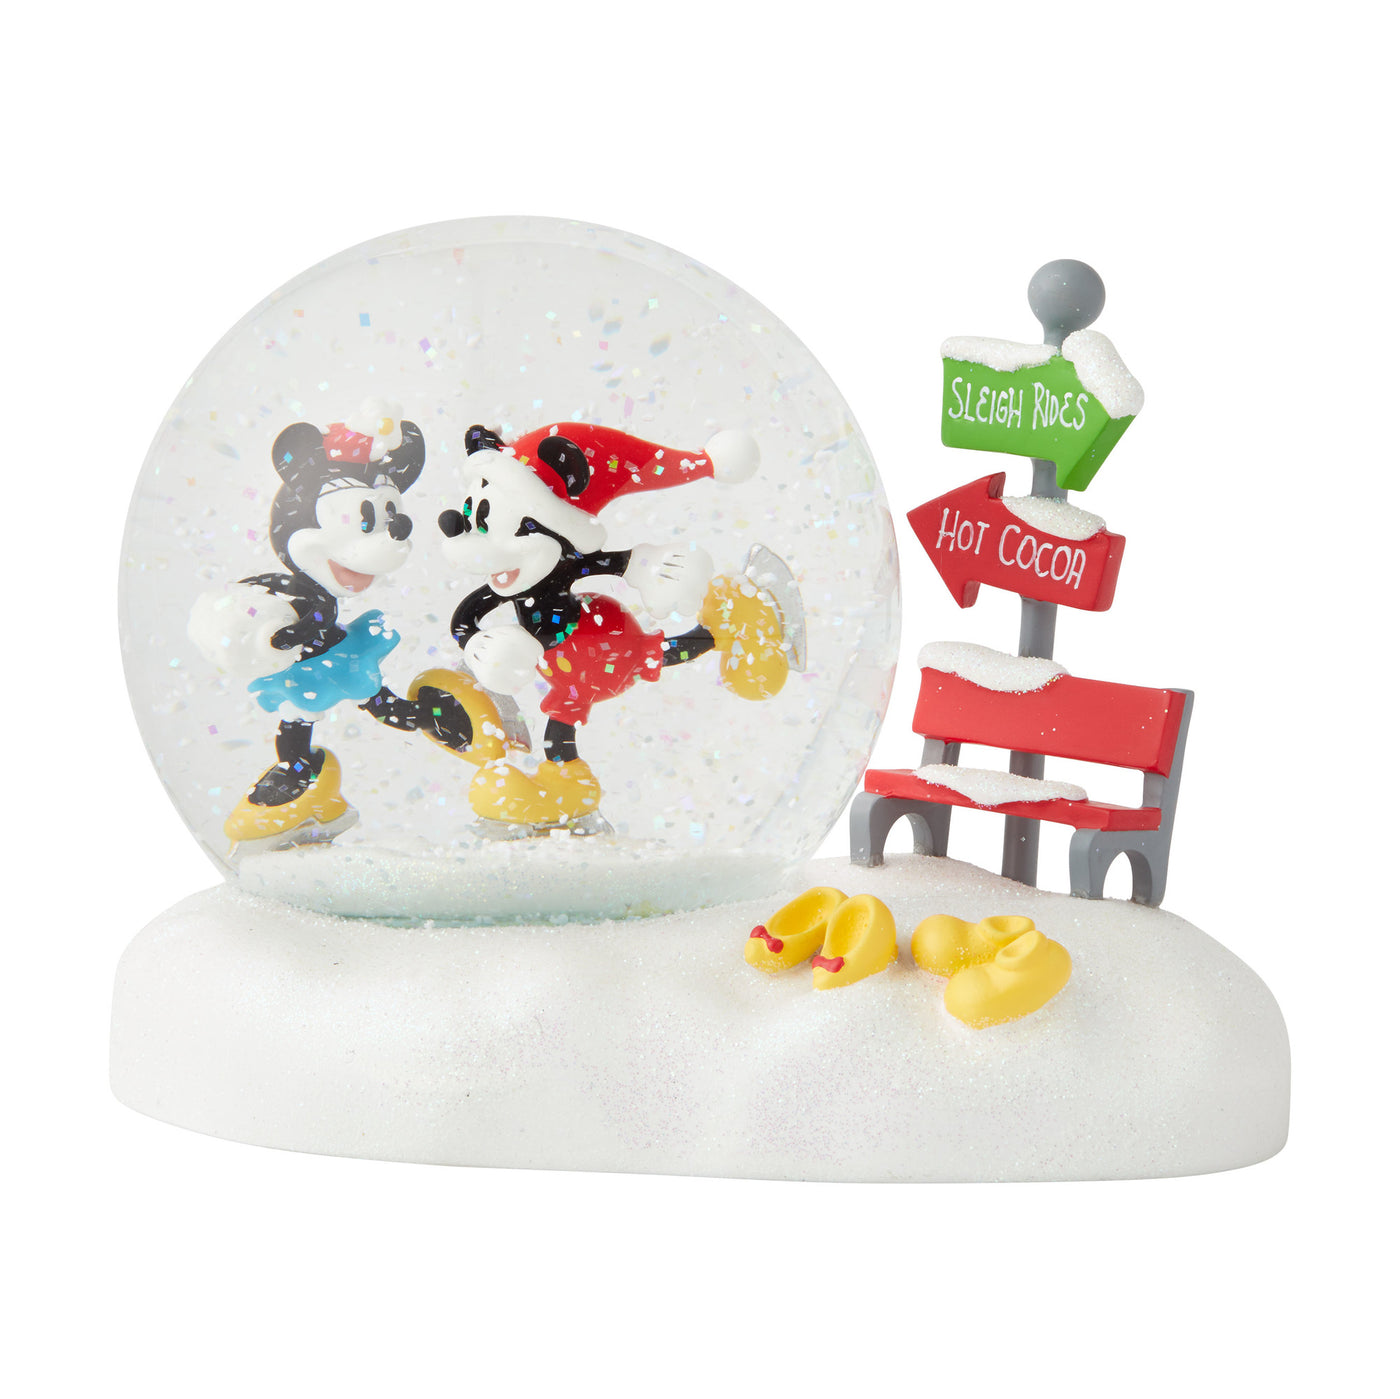 Disney Department 56 Mickey and Minnie Christmas Snowglobe New with Box